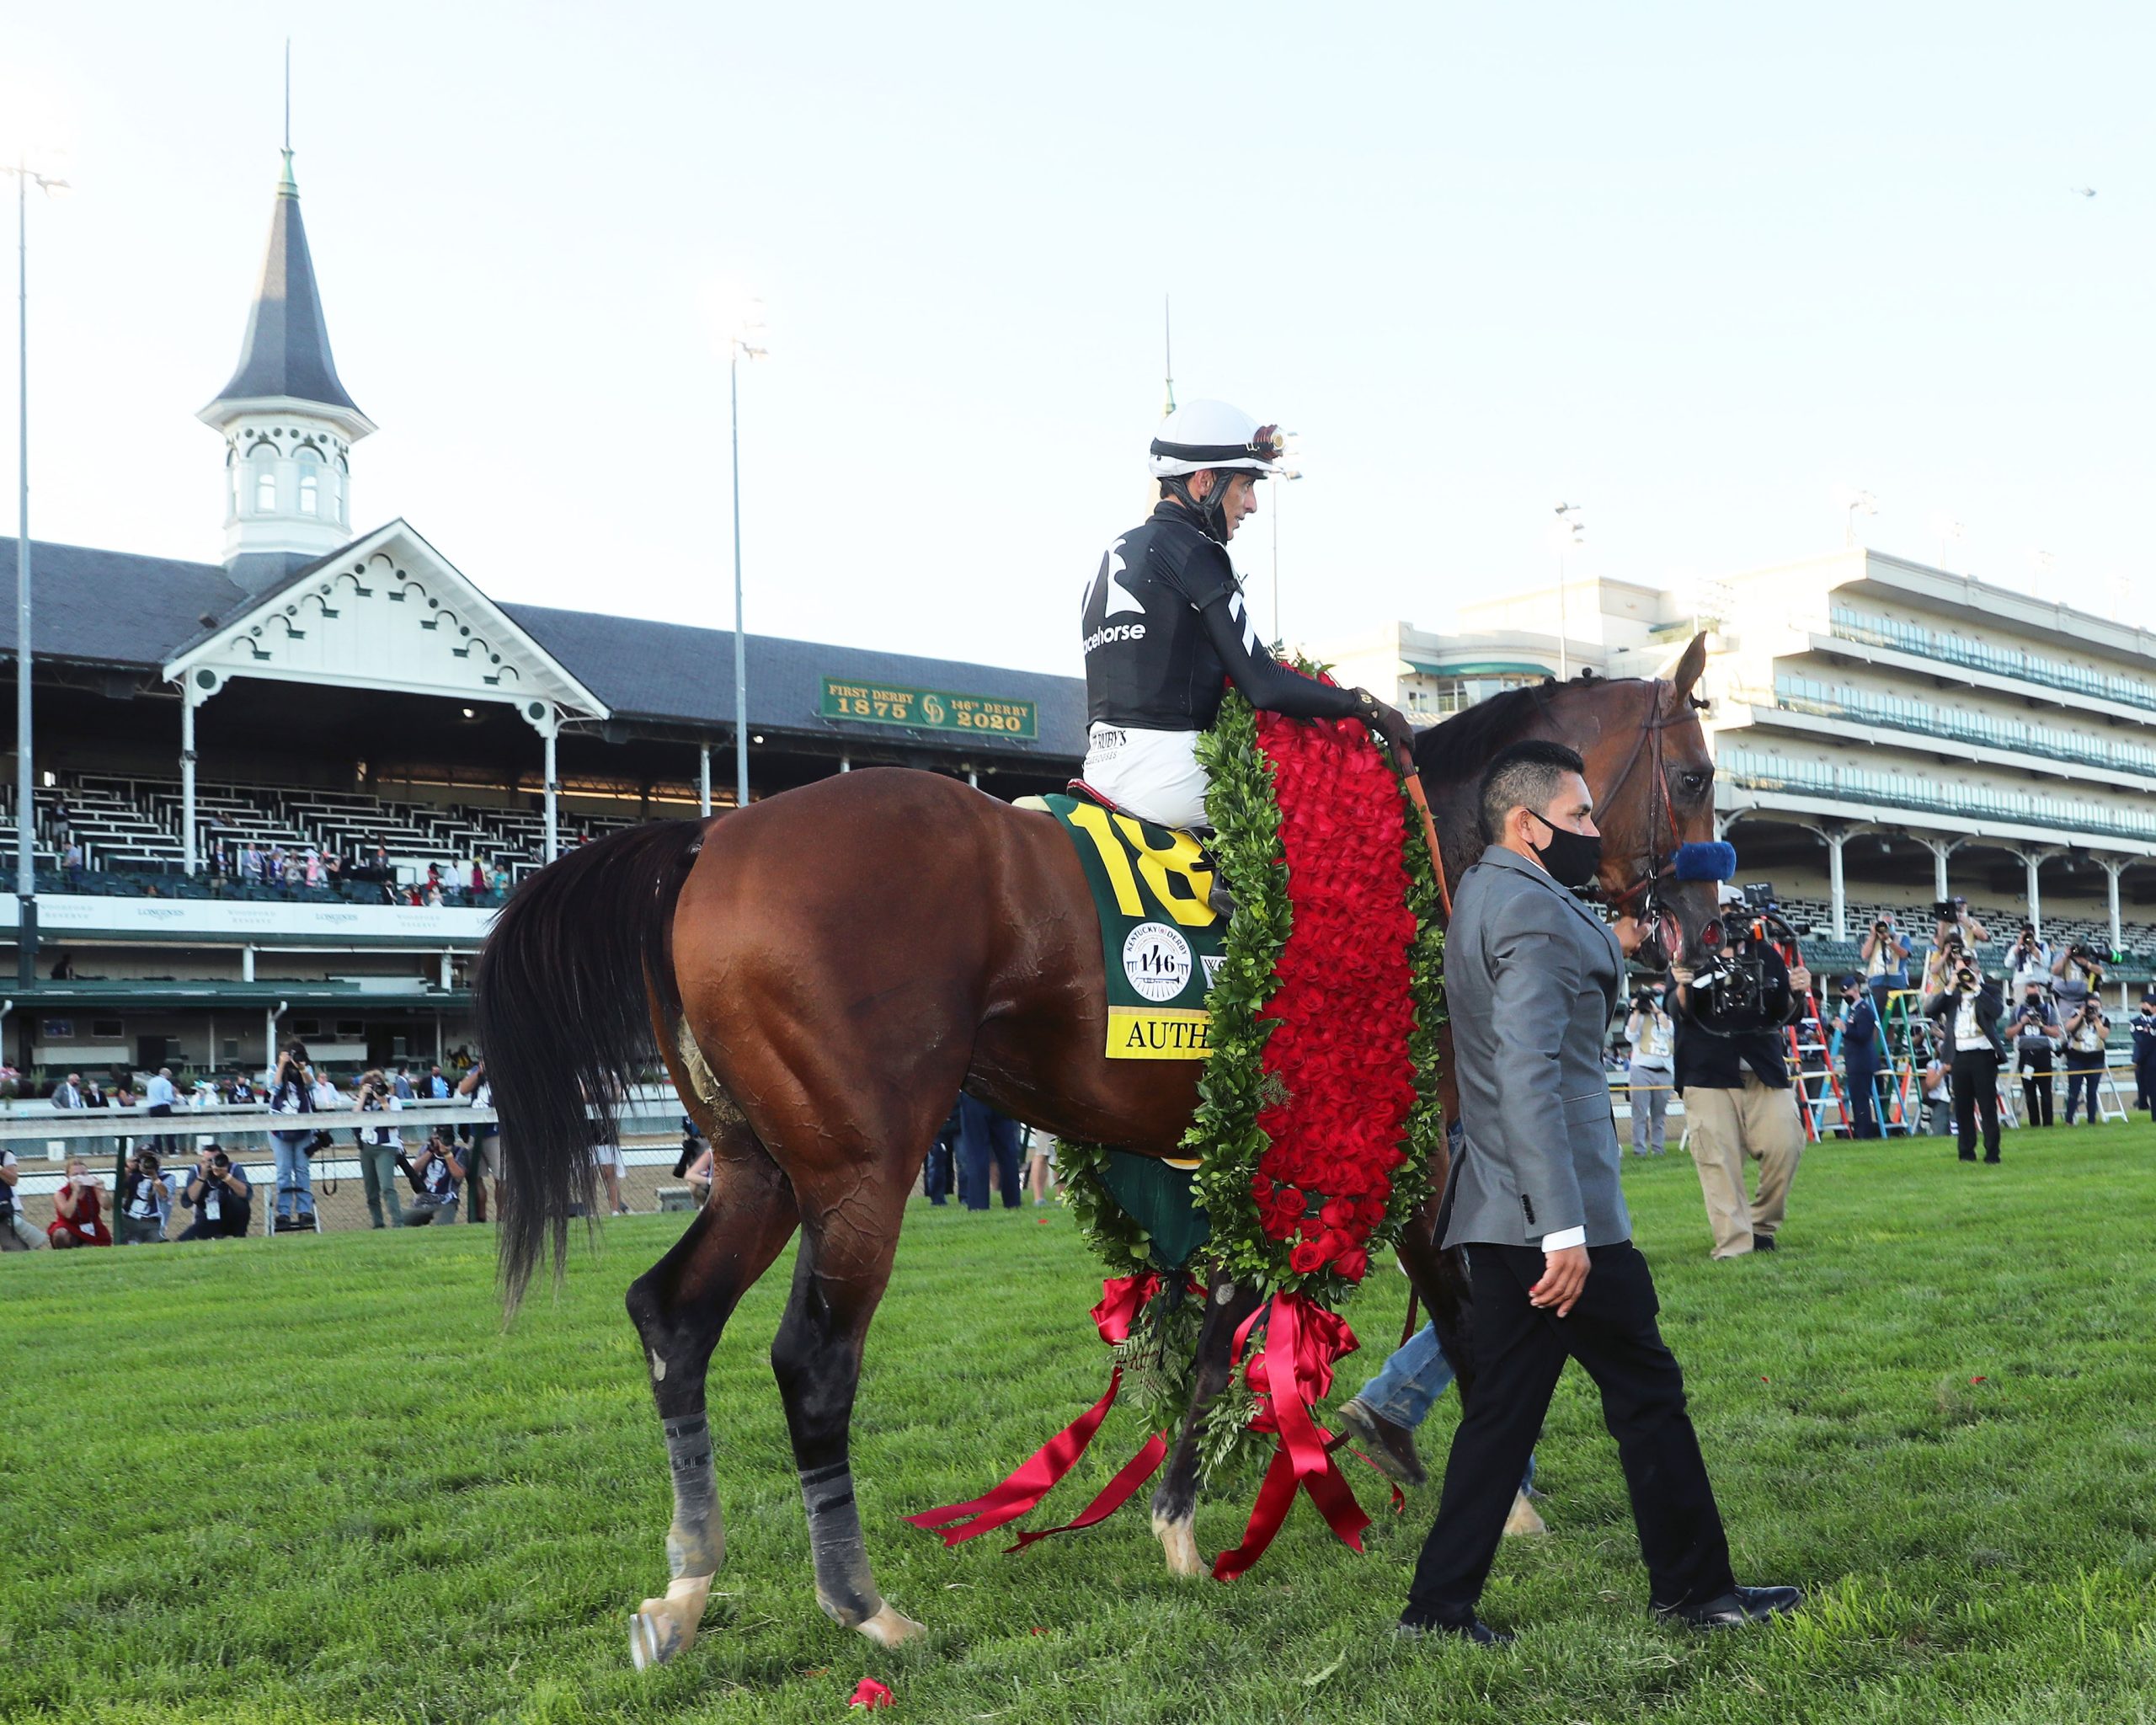 Kentucky Derby 2021 Profiles Odds, Entries and Statistical Analysis